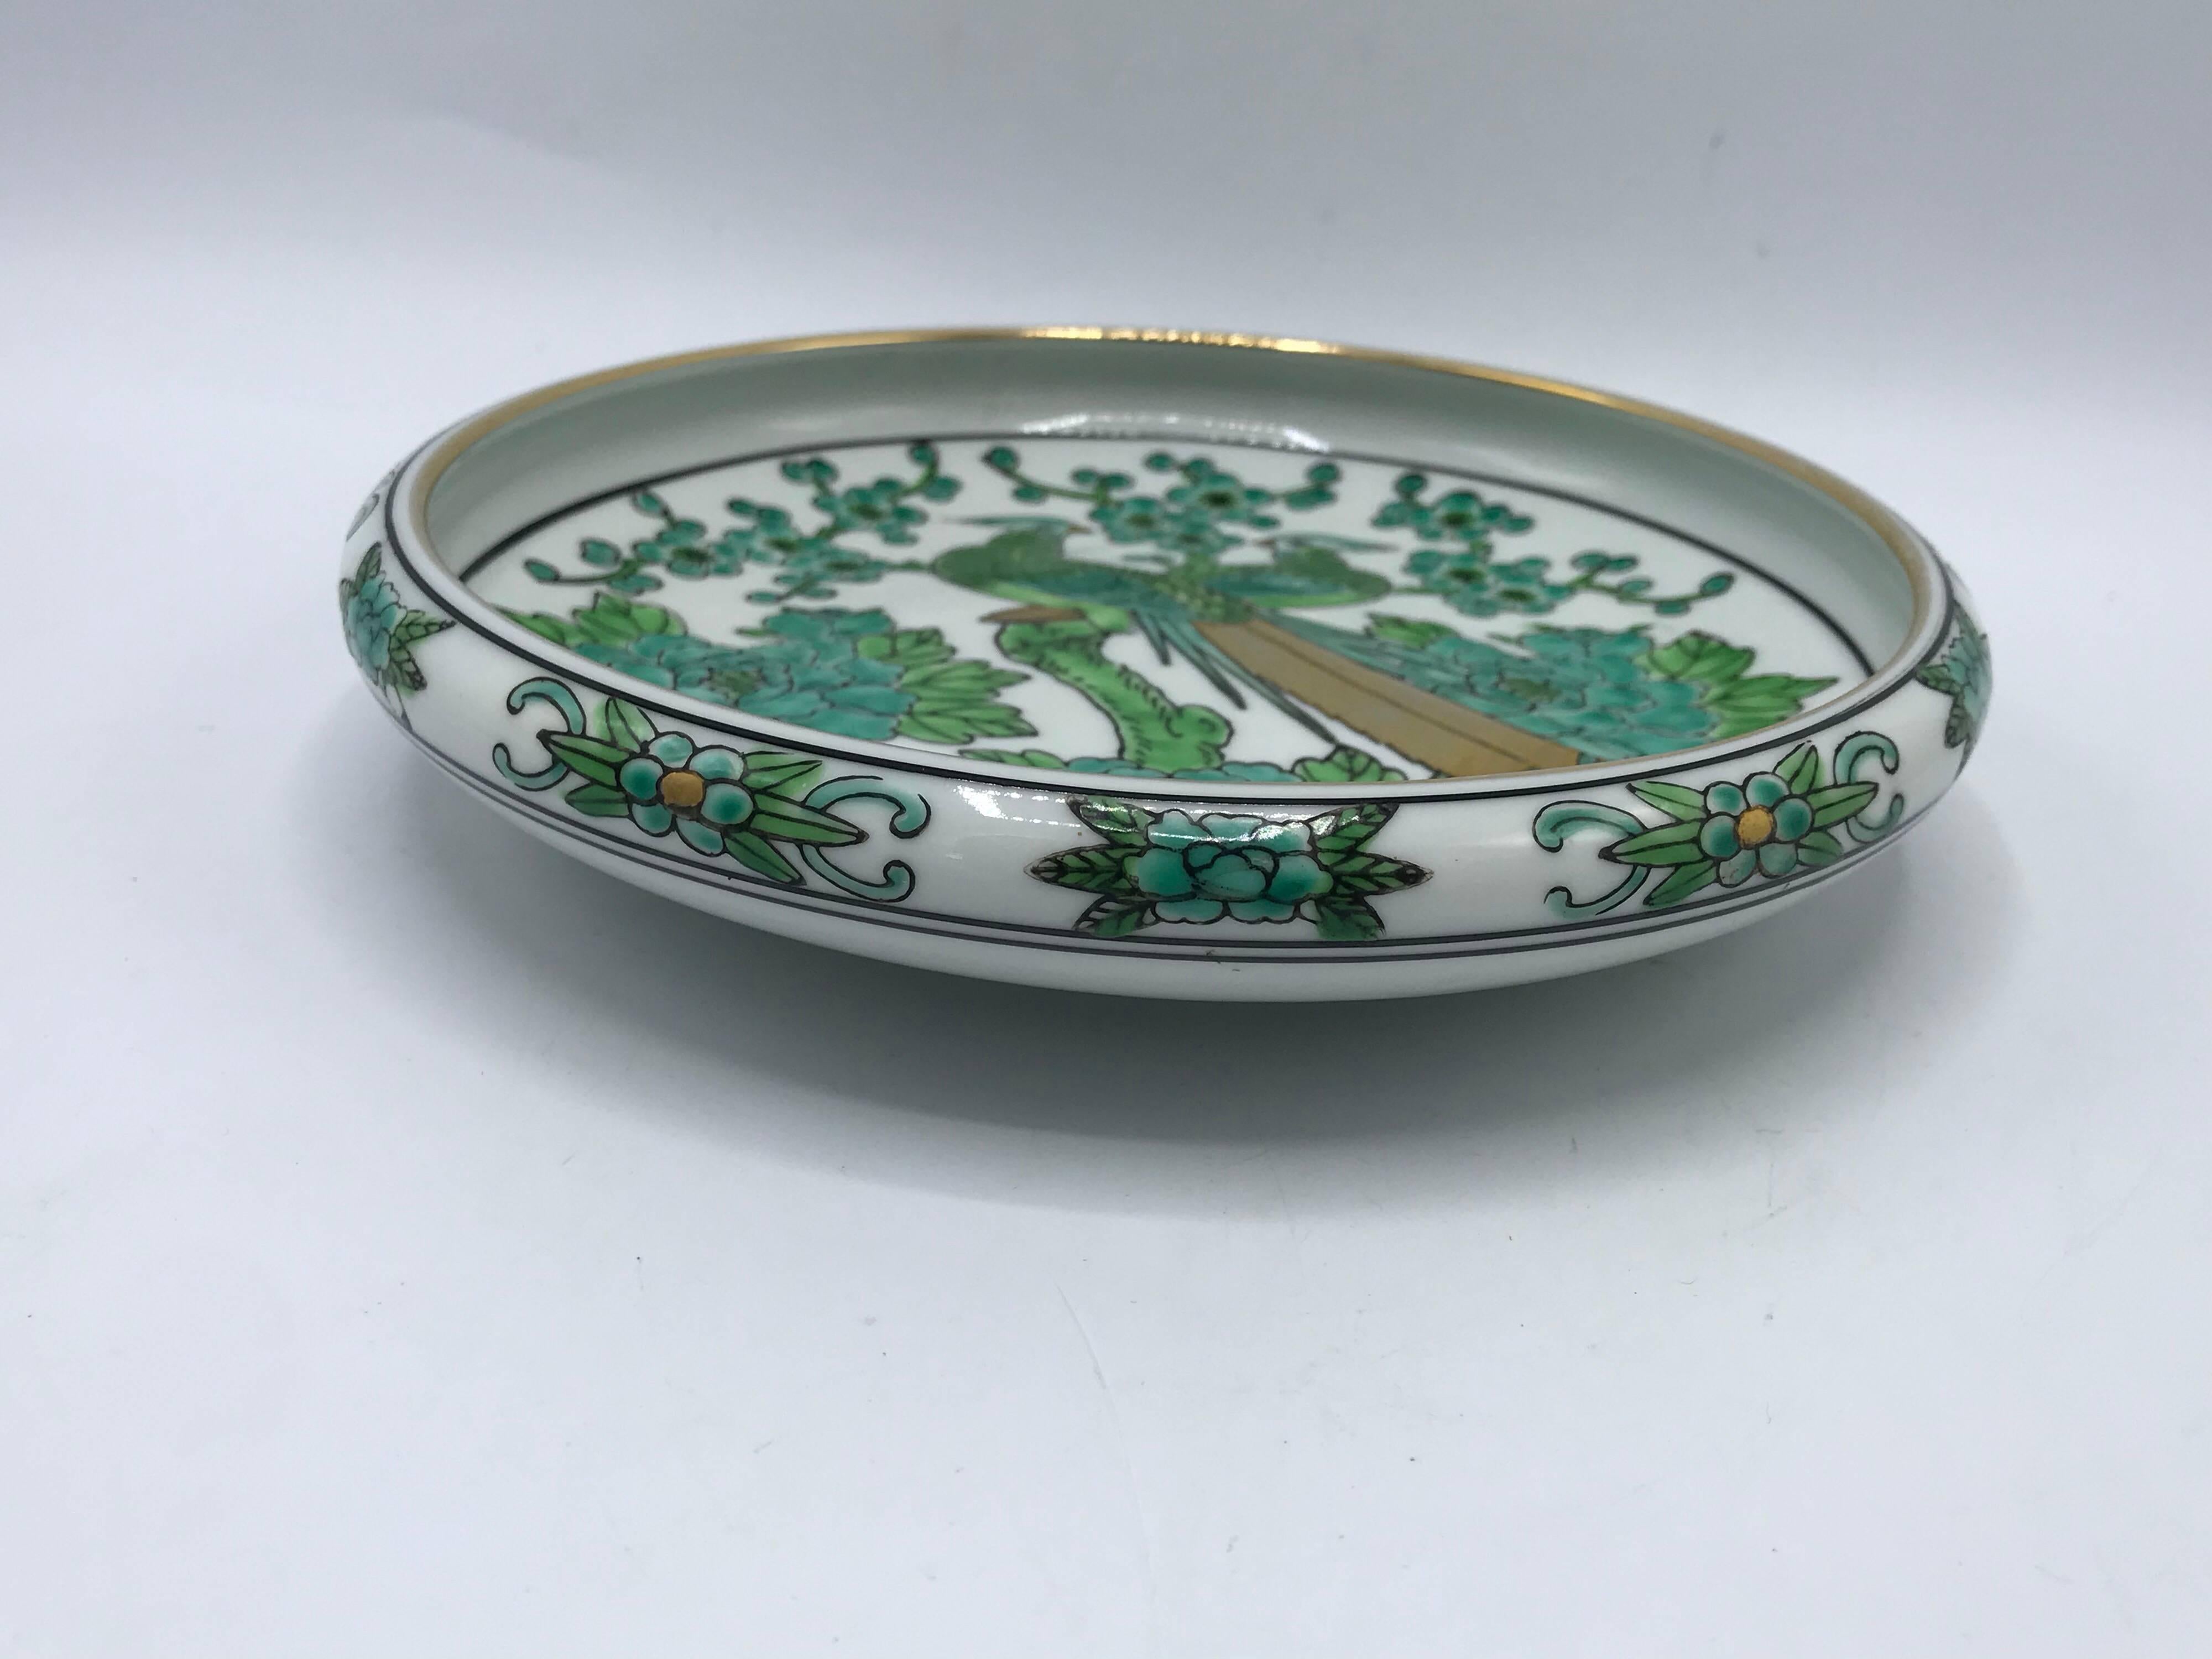 Listed is a beautiful, 1960s gold imari, green and white dish. The piece has a gorgeous peacock motif with gold accents. Marked ‘Gold Imari’ on bottom side.